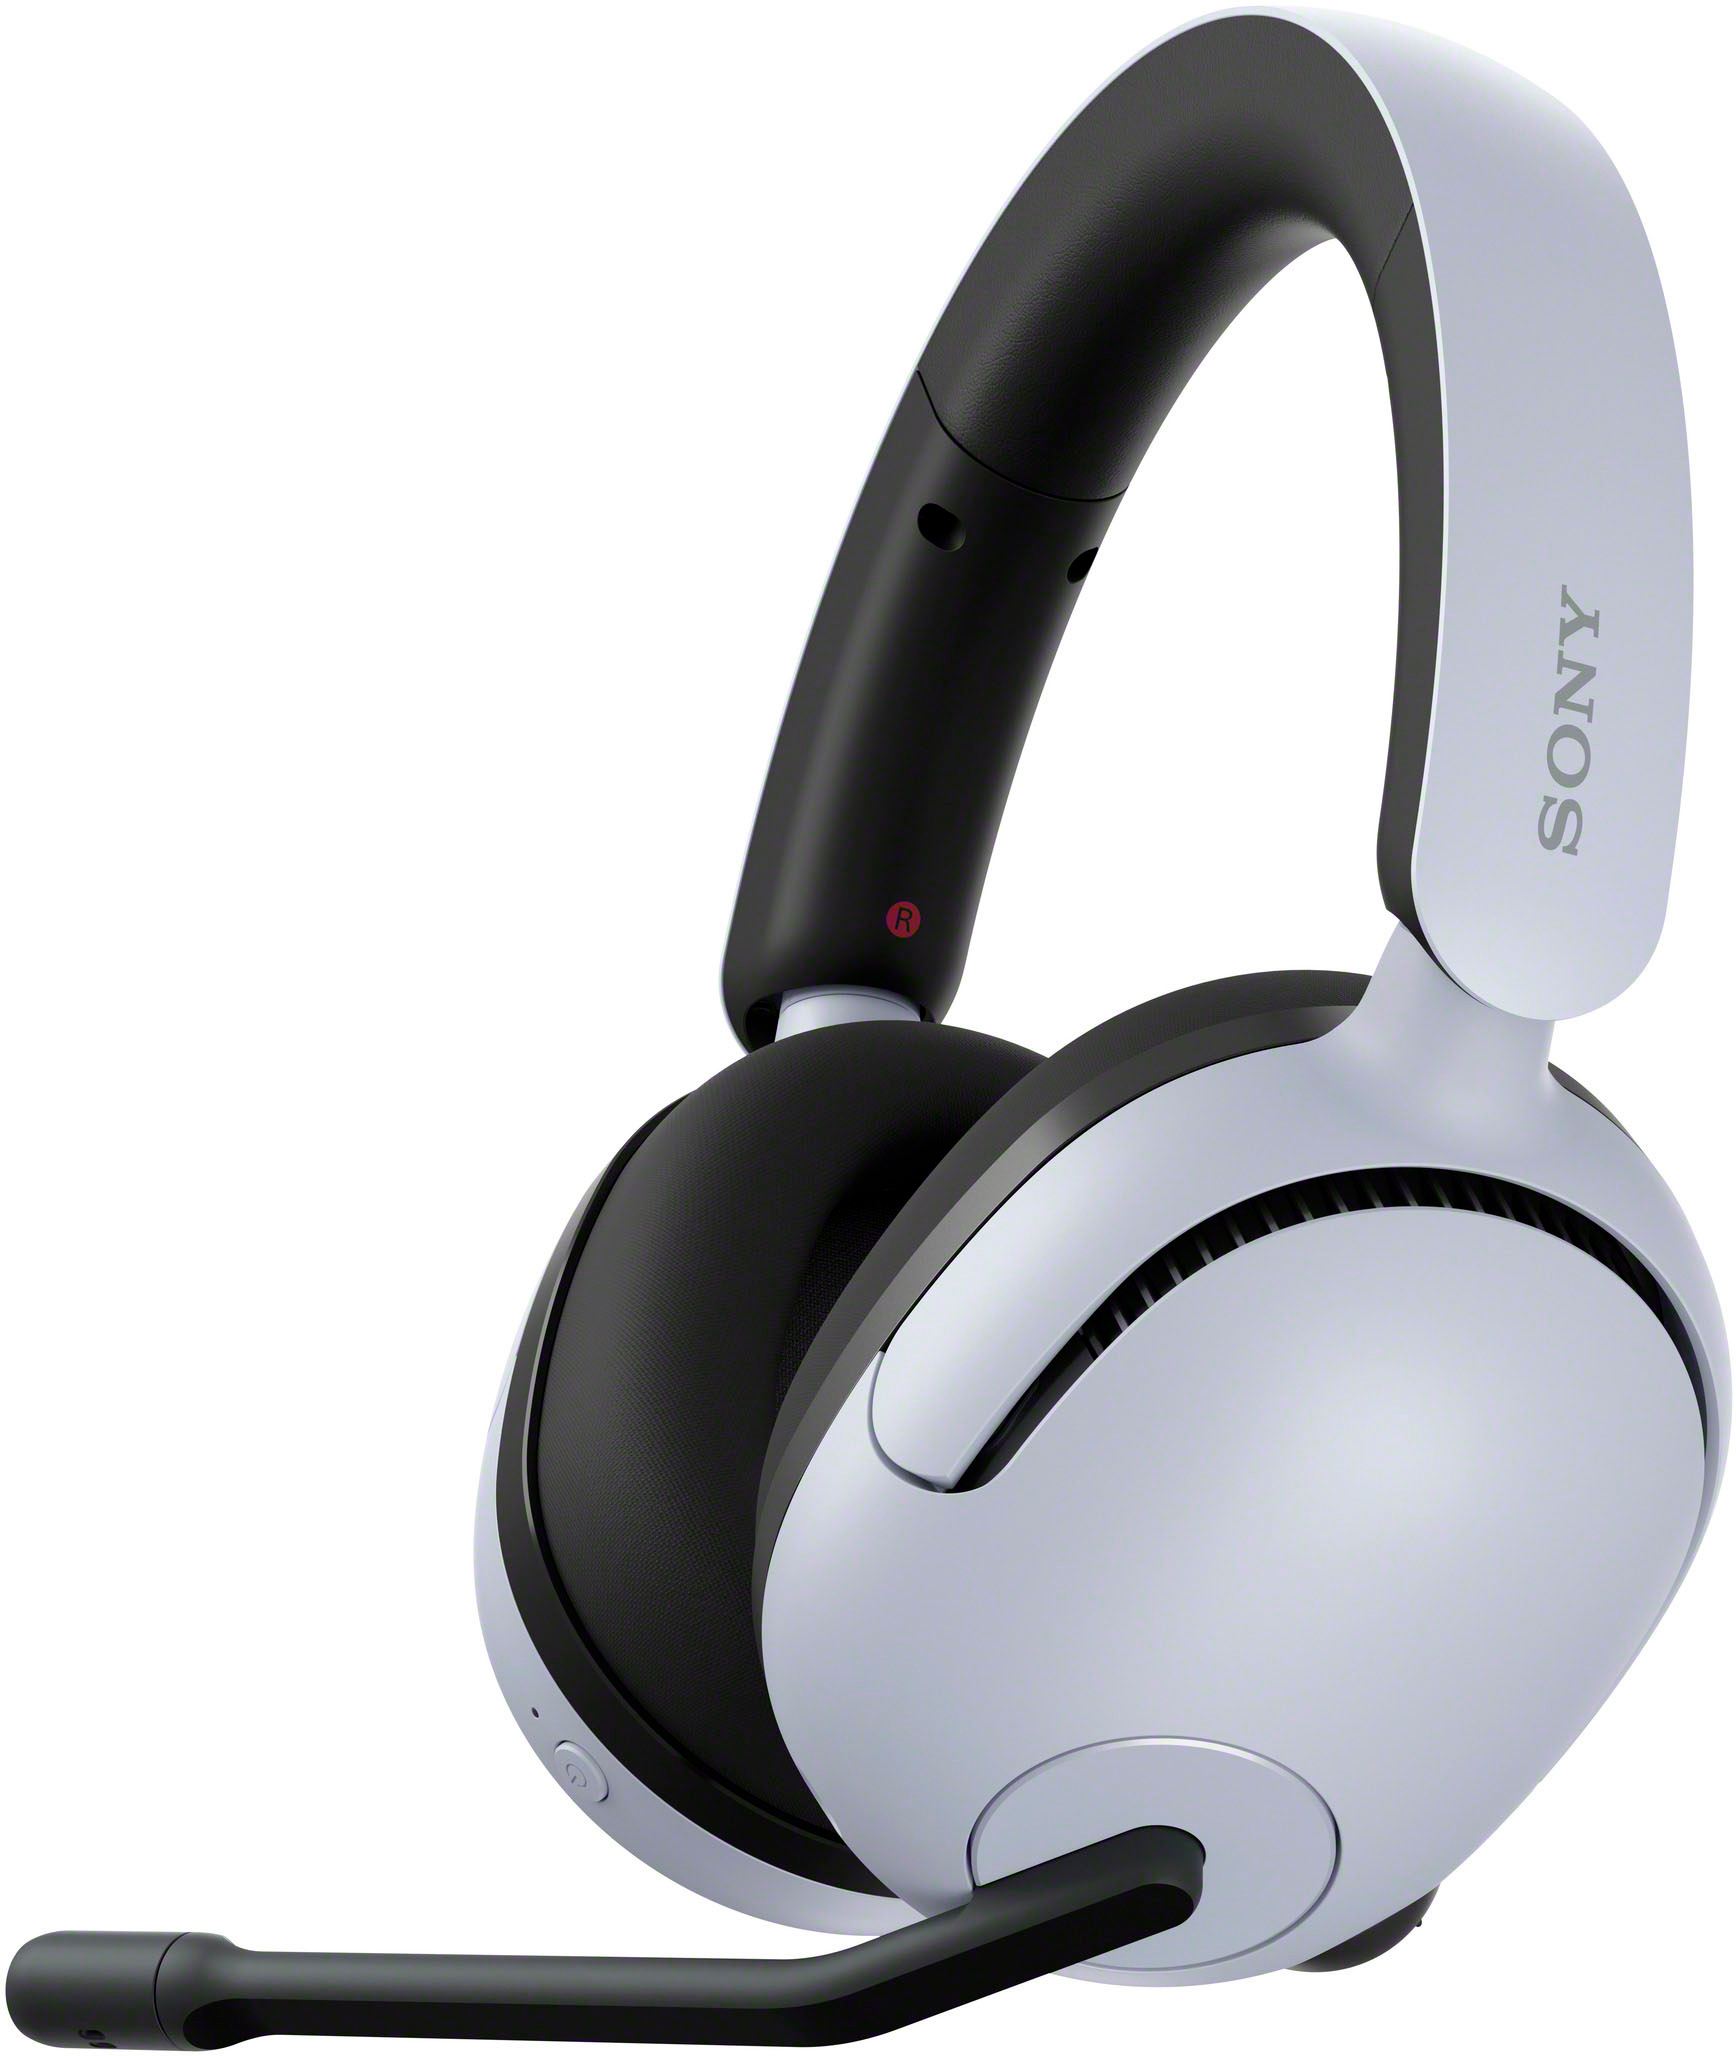 Sony INZONE H3 Wired Gaming Headset White MDRG300/W - Best Buy